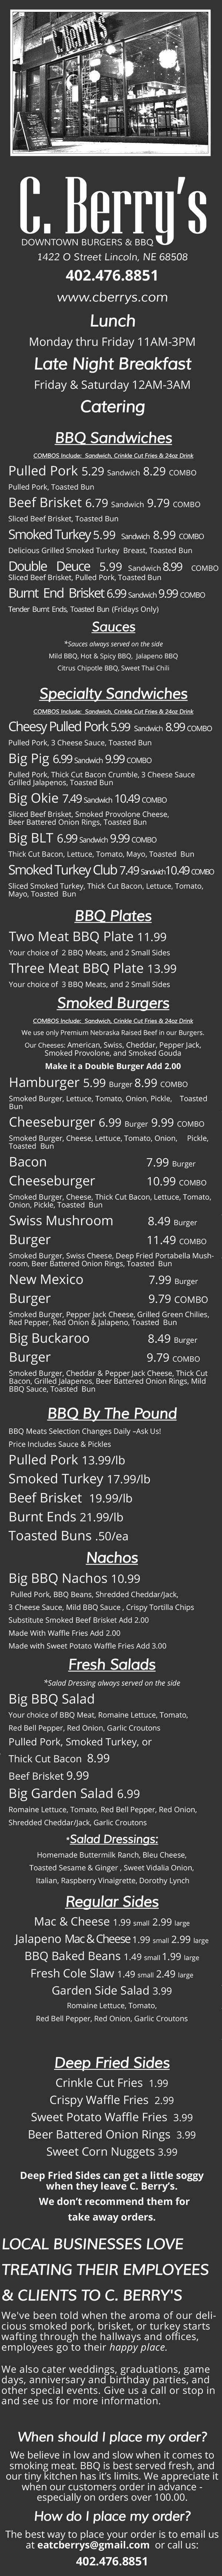 C.Berry's Downtown Burgers & BBQ Menu
1422 O Street Lincoln, NE 68508
402.476.8851 
www.cberrys.com
BBQ - Burgers - Salads - Breakfast - Late Night - Order Online
Lunch Monday thru Friday 11AM-3PM
Late Night Breakfast
Friday & Saturday 12AM-3AM
Catering
BBQ Sandwiches
COMBOS Include:  Sandwich, Crinkle Cut Fries & 24oz Drink
Pulled Pork 
5.29 
Sandwich
8.29 
COMBO
Pulled Pork, Toasted Bun
Beef Brisket 
6.79 
Sandwich
9.79 
COMBO
Sliced Beef Brisket, Toasted Bun
Smoked Turkey 
5.99 
Sandwich
8.99 
COMBO
Delicious Grilled Smoked Turkey  Breast, Toasted Bun
Double  Deuce 
5.99 
Sandwich
8.99  
COMBO
Sliced Beef Brisket, Pulled Pork, Toasted Bun
Burnt  End  Brisket 
6.99 
Sandwich
9.99 
COMBO
Tender  Burnt  Ends,  Toasted  Bun  
(Fridays Only)
Sauces
*
Sauces always served on the side 
Mild BBQ, Hot & Spicy BBQ,  Jalapeno BBQ
Citrus Chipotle BBQ, Sweet Thai Chili
Specialty Sandwiches 
COMBOS Include:  Sandwich, Crinkle Cut Fries & 24oz Drink
Cheesy Pulled Pork 
5.99  
Sandwich  
8.99 
COMBO 
Pulled Pork, 3 Cheese Sauce, Toasted Bun 
Big Pig 
6.99 
Sandwich
9.99 
COMBO
Pulled Pork, Thick Cut Bacon Crumble, 3 Cheese Sauce 
Grilled Jalapenos, Toasted Bun
Big Okie 
7.49 
Sandwich
10.49 
COMBO
Sliced Beef Brisket, Smoked Provolone Cheese,                   
Beer Battered Onion Rings, Toasted Bun
Big BLT 
6
.99 
Sandwich
9.99 
COMBO
Thick Cut Bacon, Lettuce, Tomato, Mayo, Toasted  Bun
Smoked Turkey Club 
7.49 
Sandwich
10.
49  
COMBO
Sliced Smoked Turkey, Thick Cut Bacon, Lettuce, Tomato, 
Mayo, Toasted  Bun
BBQ Plates 
Two Meat BBQ Plate 
11.99
Your choice of  2 BBQ Meats, and 2 Small Sides
Three Meat BBQ Plate 
13.99
Your choice of  3 BBQ Meats, and 2 Small Sides
Smoked Burgers
COMBOS Include:  Sandwich, Crinkle Cut Fries & 24oz Drink
We use only Premium Nebraska Raised Beef in our Burgers.
Our Cheeses: 
American, Swiss, Cheddar, Pepper Jack,             
Smoked Provolone, and Smoked Gouda 
Make it a Double Burger Add 2.00
Hamburger 
5.99 
Burger 
8.99 
COMBO
Smoked Burger, Lettuce, Tomato, Onion, Pickle,    Toasted  
Bun
Cheeseburger 
6.99 
Burger
9.99 
COMBO
Smoked Burger, Cheese, Lettuce, Tomato, Onion,     Pickle, 
Toasted  Bun
Bacon                             
7.99 
Burger
Cheeseburger               
10.99 
COMBO
Smoked Burger, Cheese, Thick Cut Bacon, Lettuce, Tomato, 
Onion, Pickle, Toasted  Bun
Swiss Mushroom          
8.49 
Burger 
Burger                            
11.49 
COMBO                                           
Smoked Burger, Swiss Cheese, Deep Fried Portabella Mush-
room, Beer Battered Onion Rings, Toasted  Bun
New Mexico                   
7.99 
Burger 
Burger 
9.79 
COMBO
Smoked Burger, Pepper Jack Cheese, Grilled Green Chilies, 
Red Pepper, Red Onion & Jalapeno, Toasted  Bun
Big Buckaroo                 
8.49 
Burger
Burger                            
9.79 
COMBO
Smoked Burger, Cheddar & Pepper Jack Cheese, Thick Cut 
Bacon, Grilled Jalapenos, Beer Battered Onion Rings, Mild 
BBQ Sauce, Toasted  Bun
BBQ By The Pound
BBQ Meats Selection Changes Daily 
–
Ask Us! 
Price Includes Sauce & Pickles
Pulled Pork 
13.99/lb
Smoked Turkey 
17.99/lb
Beef Brisket  
19.99/lb
Burnt Ends 
21.99/lb
Toasted Buns 
.50/ea
Nachos
Big BBQ Nachos 
10.99
Pulled Pork, BBQ Beans, Shredded Cheddar/Jack, 
3 Cheese Sauce, Mild BBQ Sauce , Crispy Tortilla Chips
Substitute Smoked Beef Brisket Add 2.00
Made With Waffle Fries Add 2.00
Made with Sweet Potato Waffle Fries Add 3.00
Fresh Salads
*
Salad Dressing always served on the side 
Big BBQ Salad 
Your choice of BBQ Meat, Romaine Lettuce, Tomato, 
Red Bell Pepper, Red Onion, Garlic Croutons
Pulled Pork, Smoked Turkey, or 
Thick Cut Bacon  
8.99
Beef Brisket 
9.99
Big Garden Salad 
6.99
Romaine Lettuce, Tomato, Red Bell Pepper, Red Onion,  
Shredded Cheddar/Jack, Garlic Croutons
*
Salad Dressings: 
Homemade Buttermilk Ranch, Bleu Cheese, 
Toasted Sesame & Ginger , Sweet Vidalia Onion,
Italian, Raspberry Vinaigrette, Dorothy Lynch 
Regular Sides
Mac & Cheese 
1.99 
small
2.99 
large
Jalapeno 
Mac & Cheese 
1.99 
small
2.99 
large
BBQ Baked Beans 
1.49 
small
1.99 
large
Fresh Cole Slaw 
1.49 
small
2.49 
large
Garden Side Salad 
3.99
Romaine Lettuce, Tomato, 
Red Bell Pepper, Red Onion, Garlic Croutons
Deep Fried Sides
Crinkle Cut Fries  
1.99
Crispy Waffle Fries  
2.99
Sweet Potato Waffle Fries  
3.99
Beer Battered Onion Rings  
3.99
Sweet Corn Nuggets 
3.99
Deep Fried Sides can get a little soggy 
when they leave C. Berry’s.
We don’t recommend them for 
take away orders.  
LOCAL BUSINESSES LOVE 
TREATING THEIR EMPLOYEES 
& CLIENTS TO C. BERRY'S
We've been told when the aroma of our deli-
cious smoked pork, brisket, or turkey starts 
wafting through the hallways and offices,        
employees go to their
happy place.
We also cater weddings, graduations, game 
days, anniversary and birthday parties, and   
other special events. Give us a call or stop in  
and see us for more information.  
When should I place my order?
We believe in low and slow when it comes to 
smoking meat. BBQ is best served fresh, and 
our tiny kitchen has it’s limits. We appreciate it 
when our customers order in advance 
-
especially on orders over 100.00.
How do I place my order?
The best way to place your order is to email us 
at 
eatcberrys@gmail.com  
or call us:
402.476.8851
